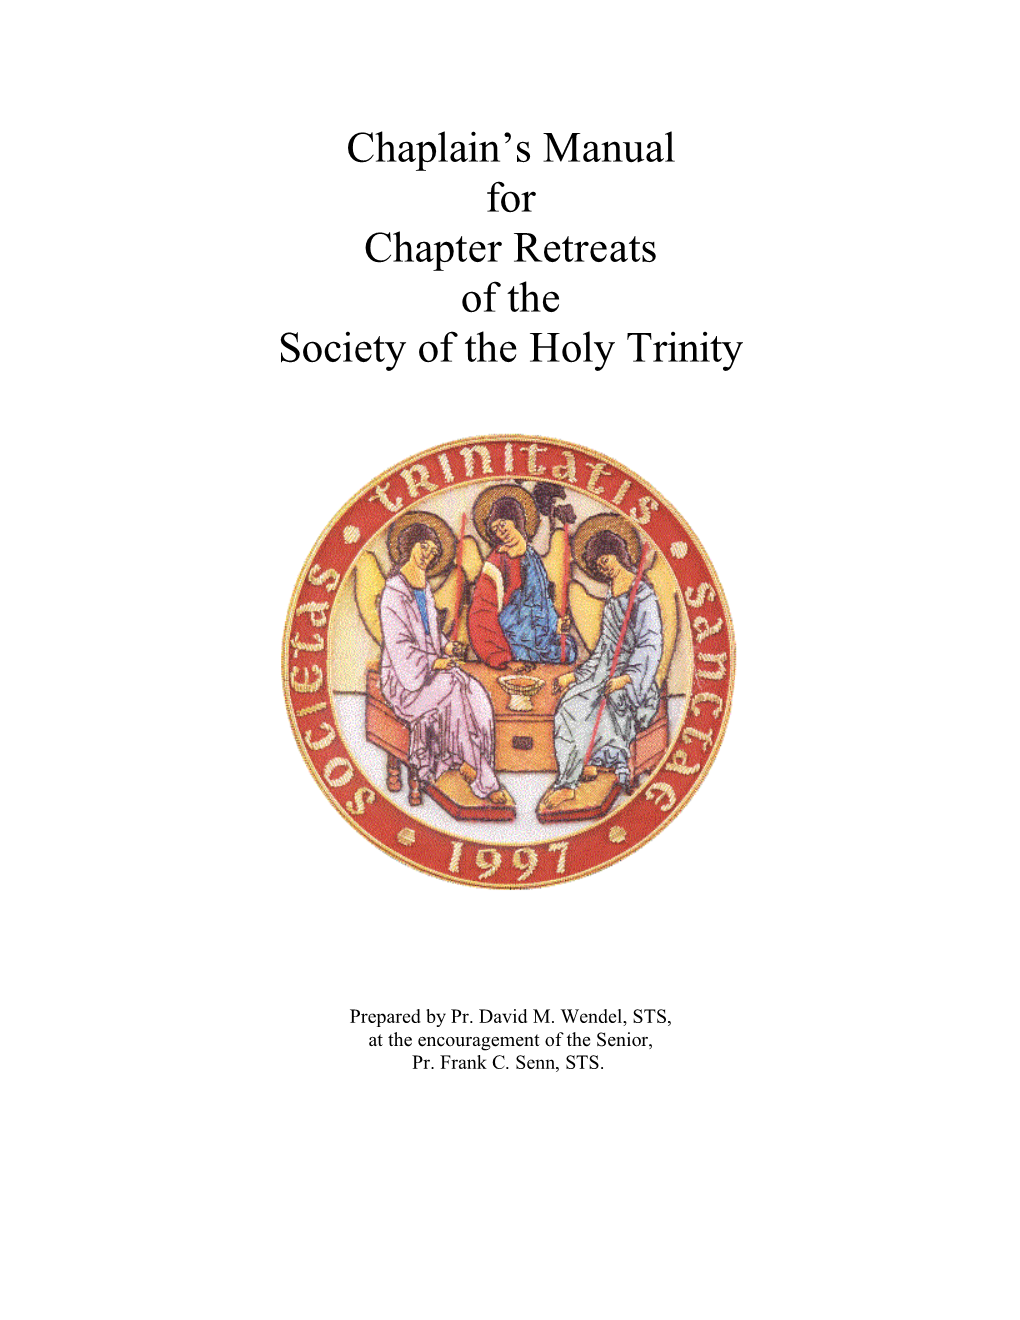 Chaplain's Manual for Chapter Retreats of the Society of the Holy